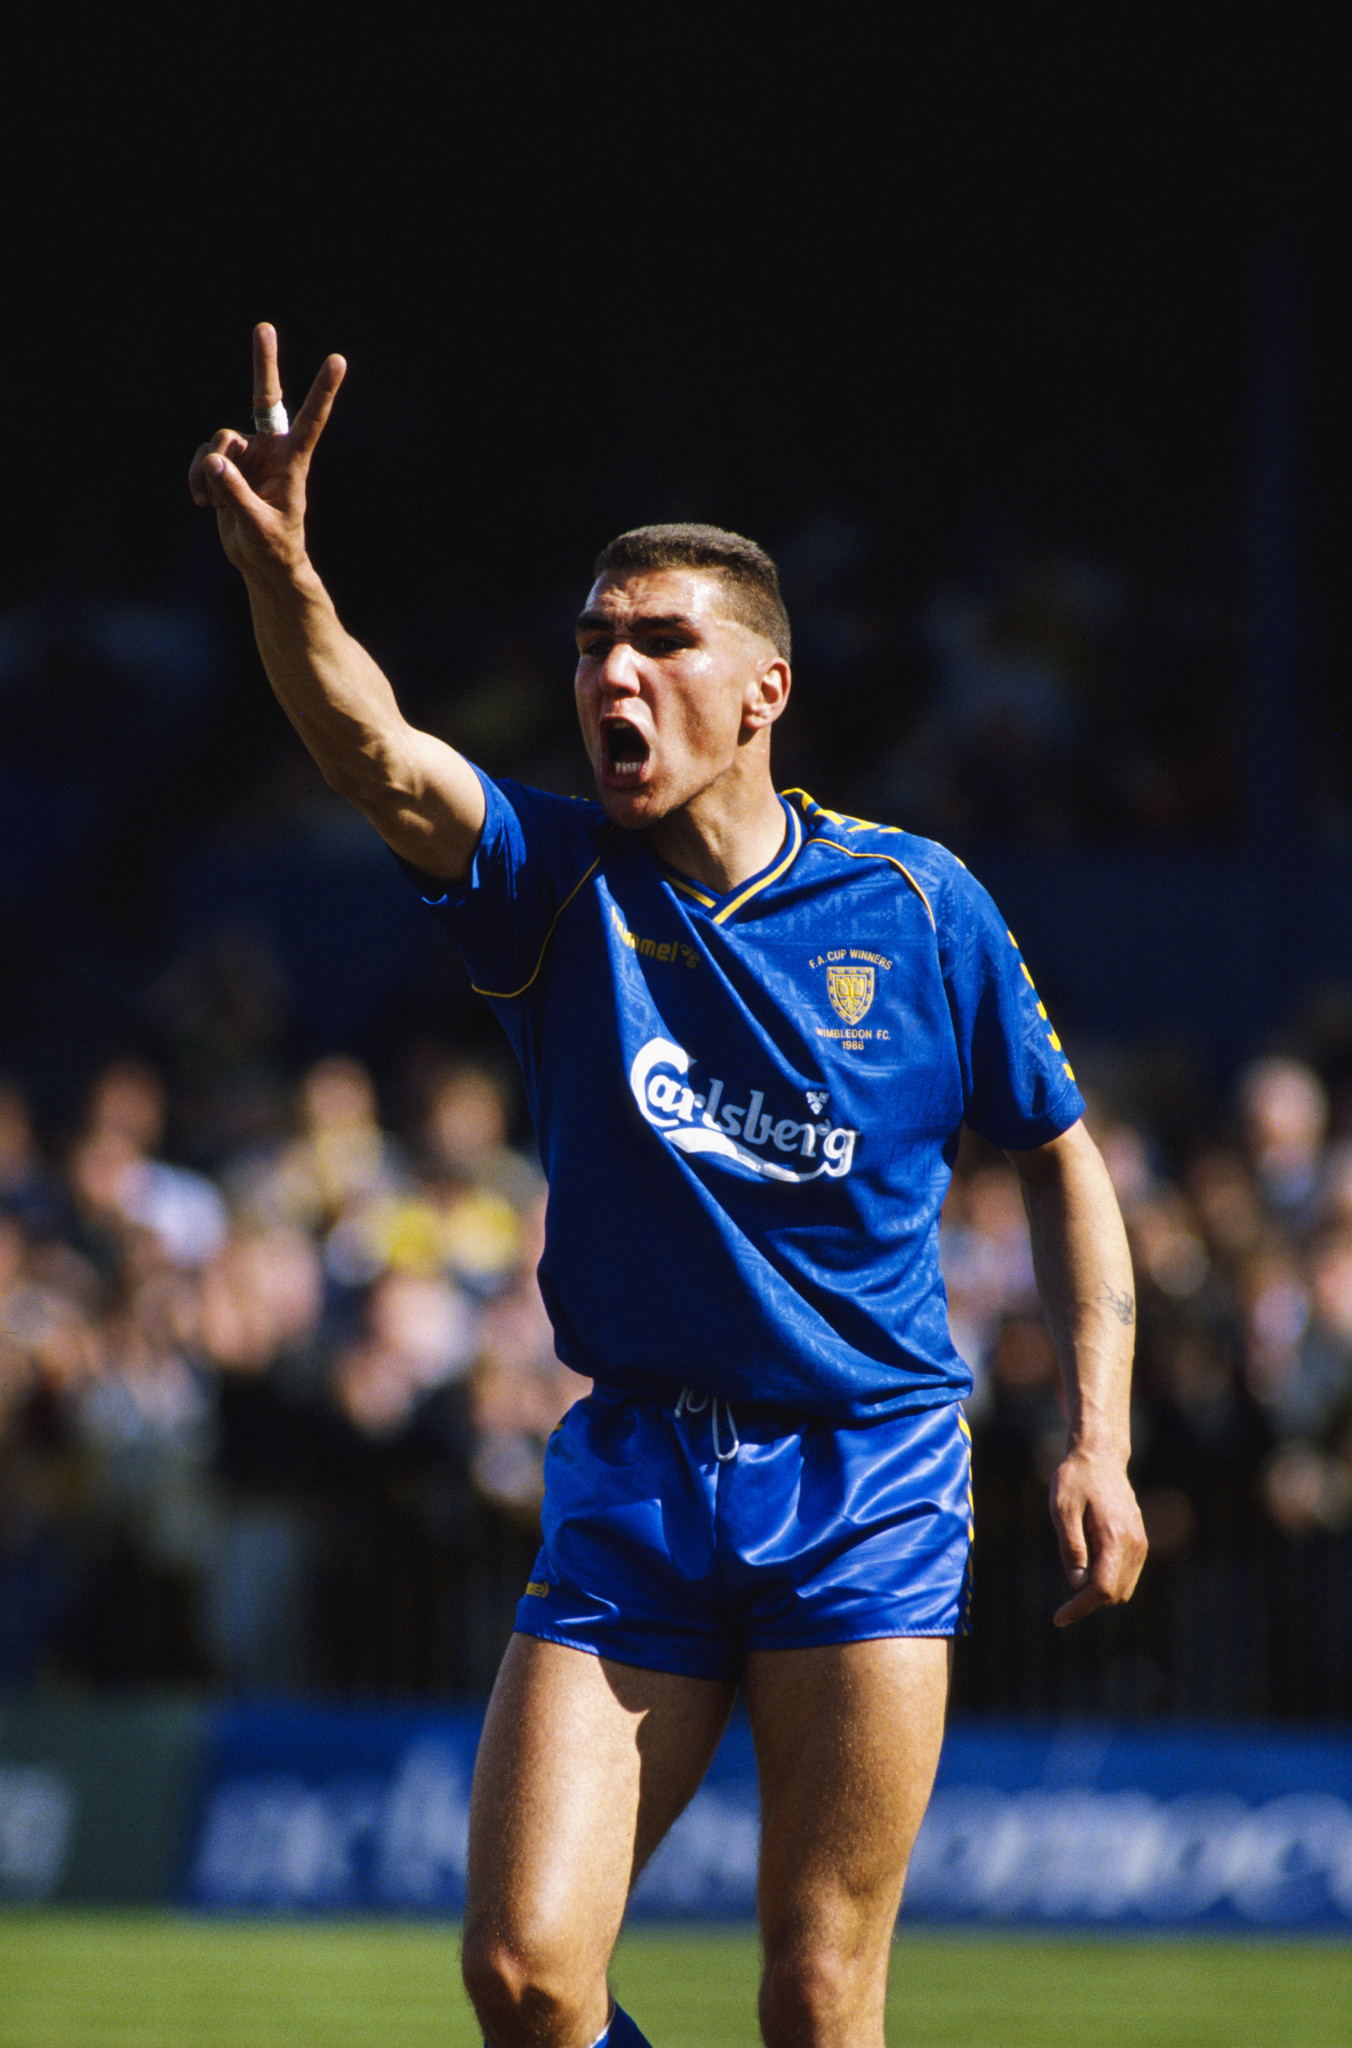 Vinnie Jones, who established a hard-man reputation playing for Wimbledon FC in the 1980s, has done the same in Hollywood movies ©Getty Images